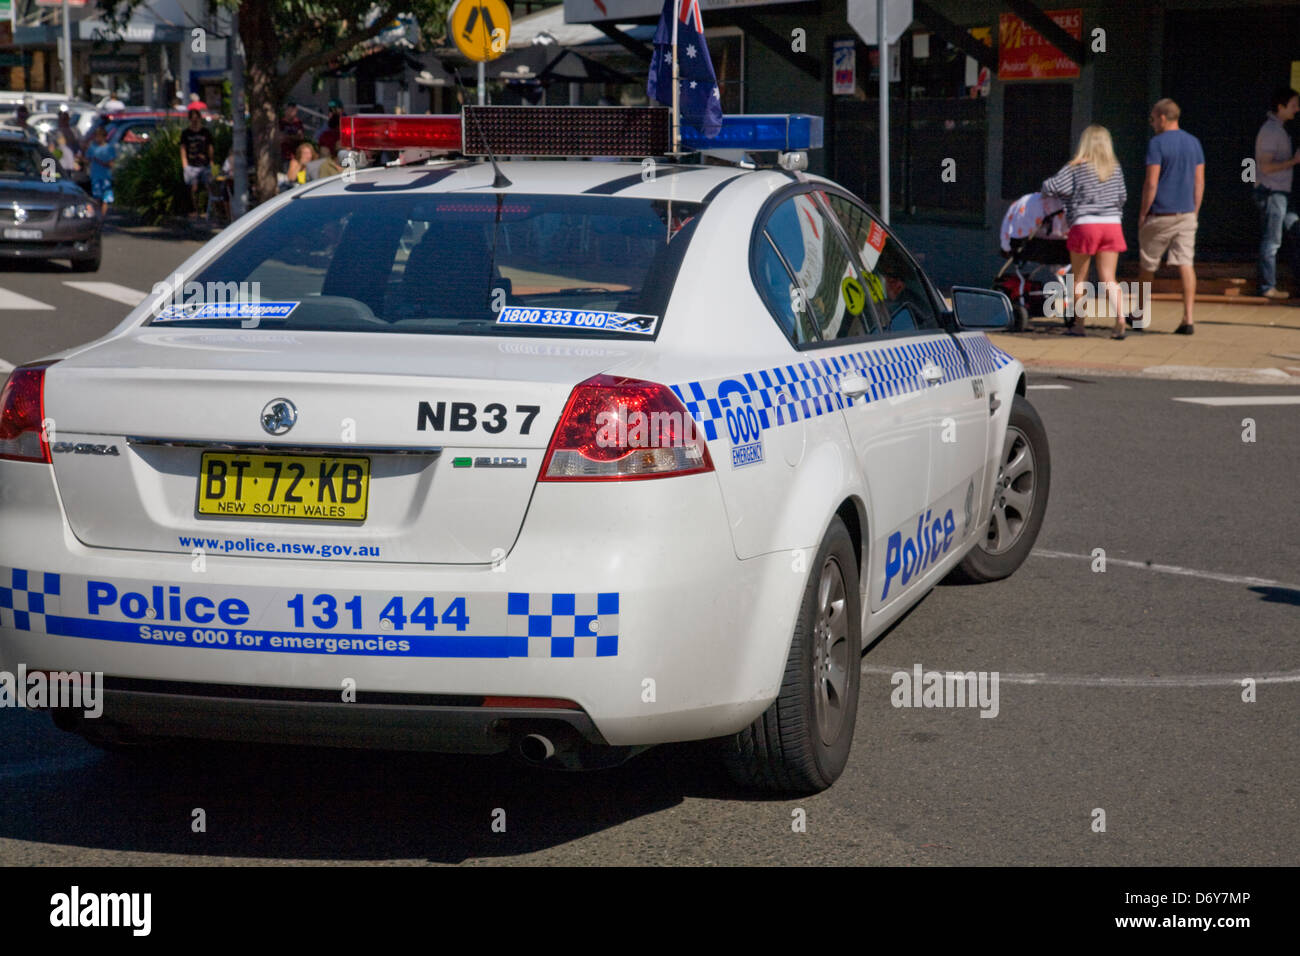 Holden Omega Commodore police car in Sydney,NSW,Australia in 2013 before Holden ceased car production in Australia Stock Photo